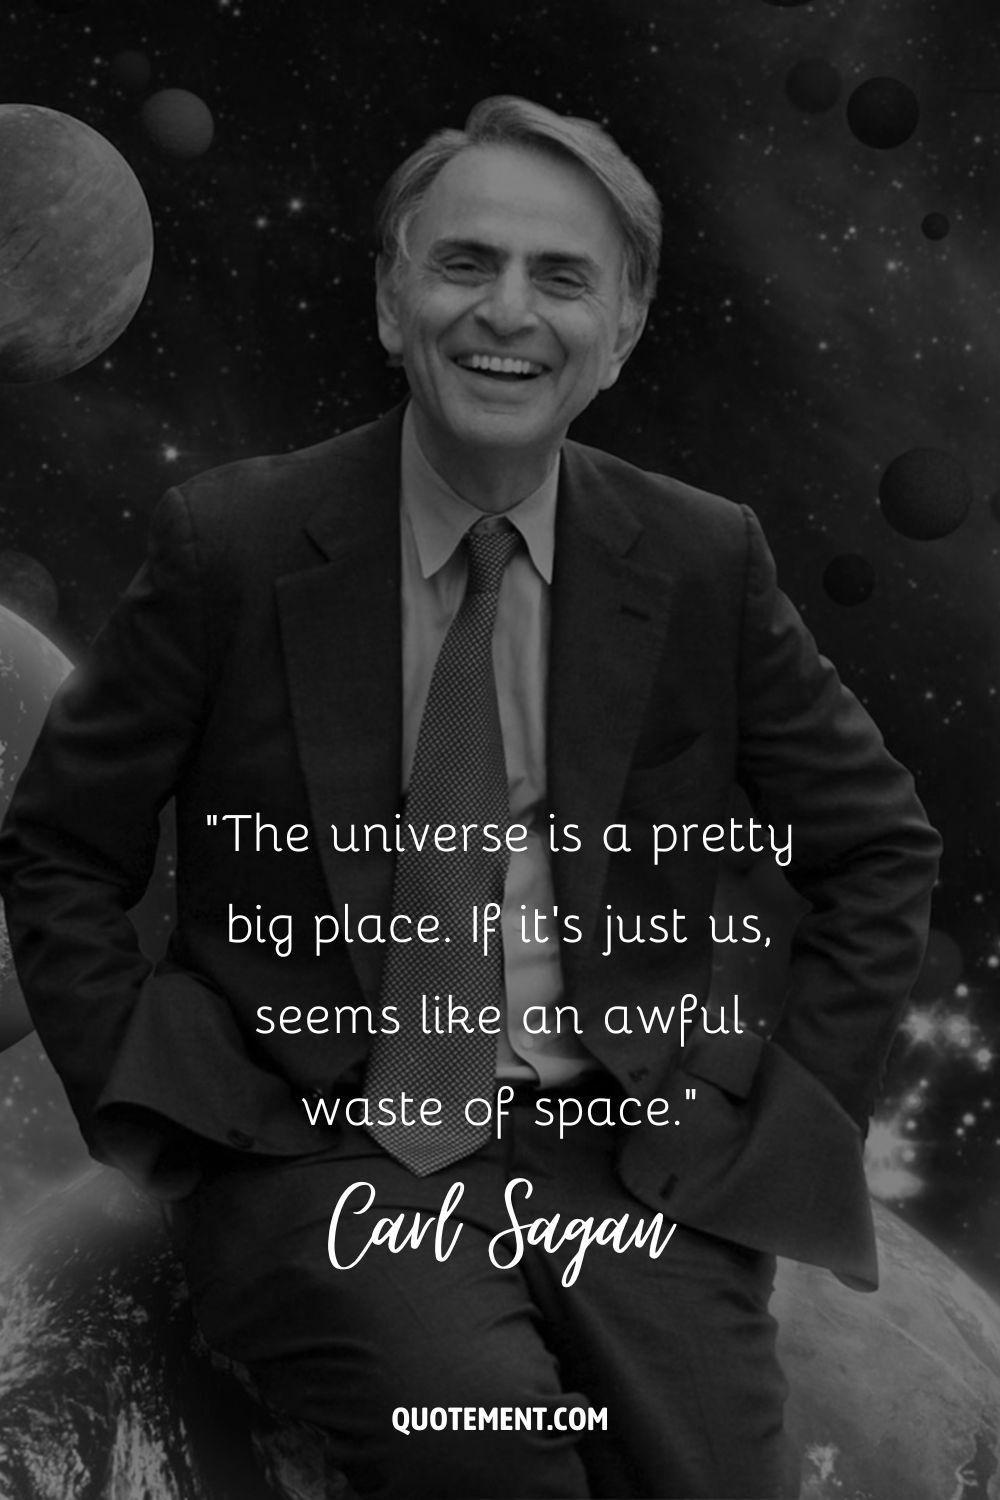 The universe is a pretty big place. If it's just us, seems like an awful waste of space